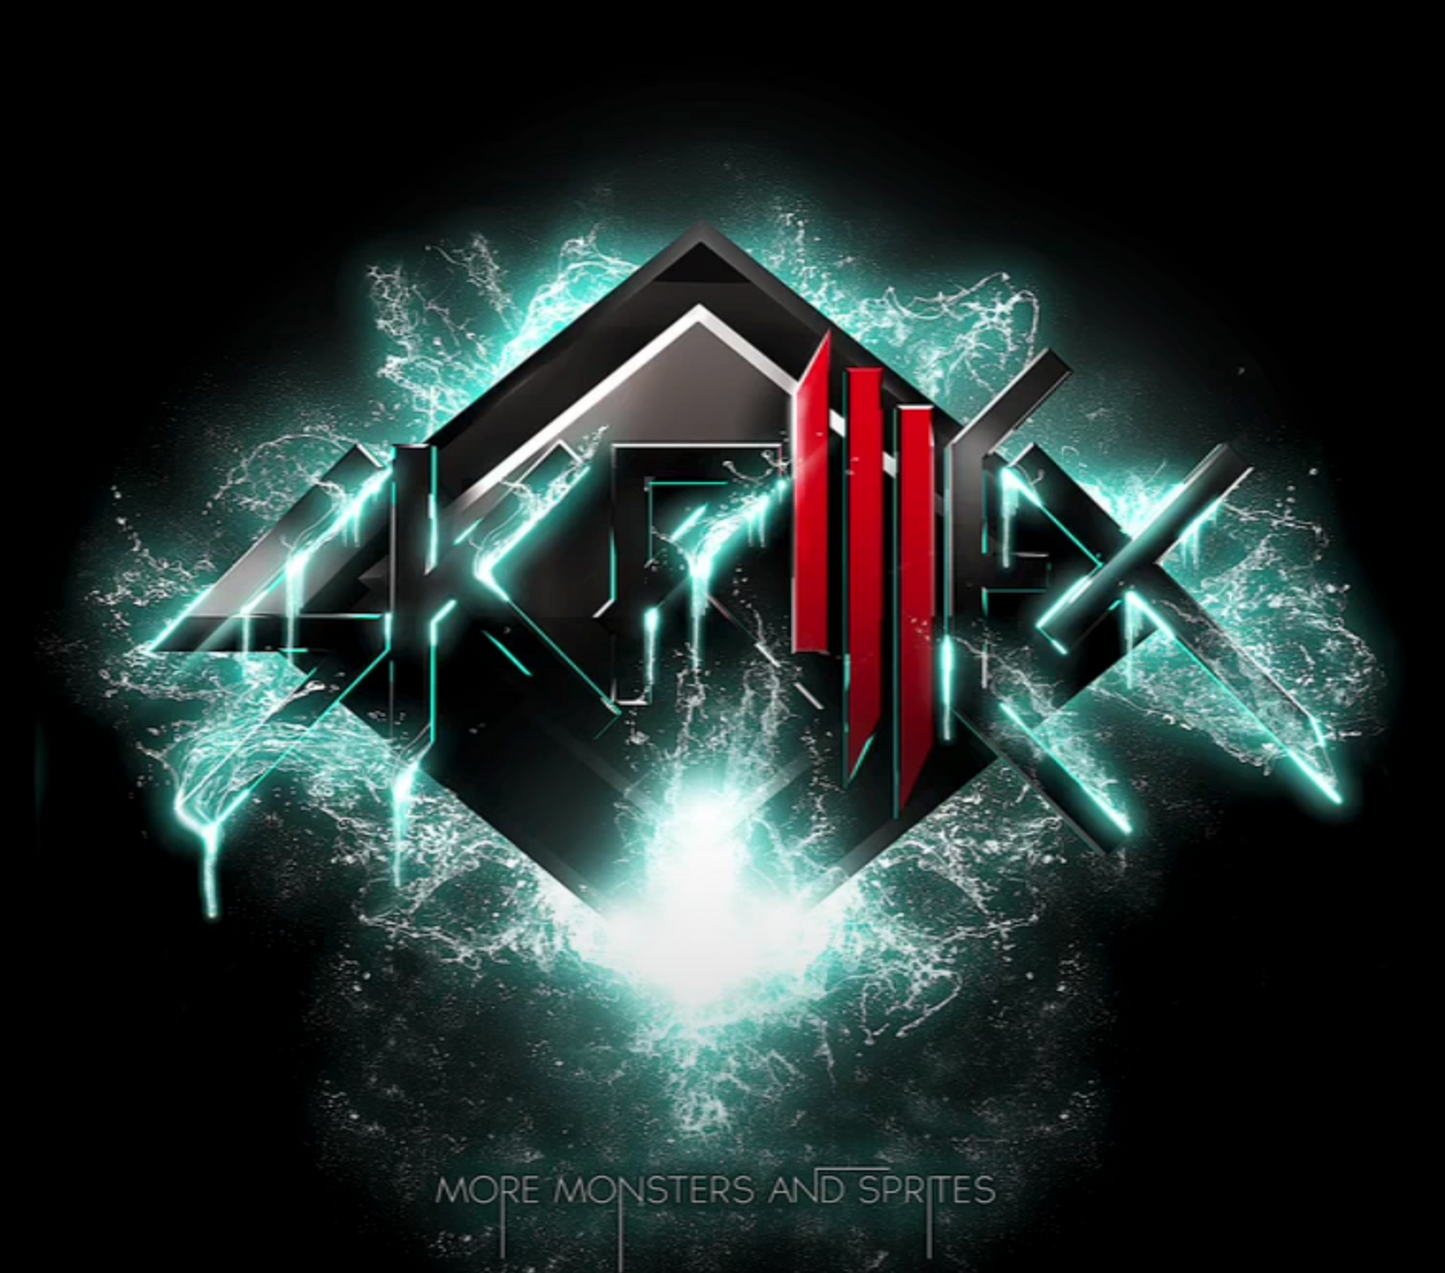 Skrillex - First Of The Year (Equinox) xLights Sequence